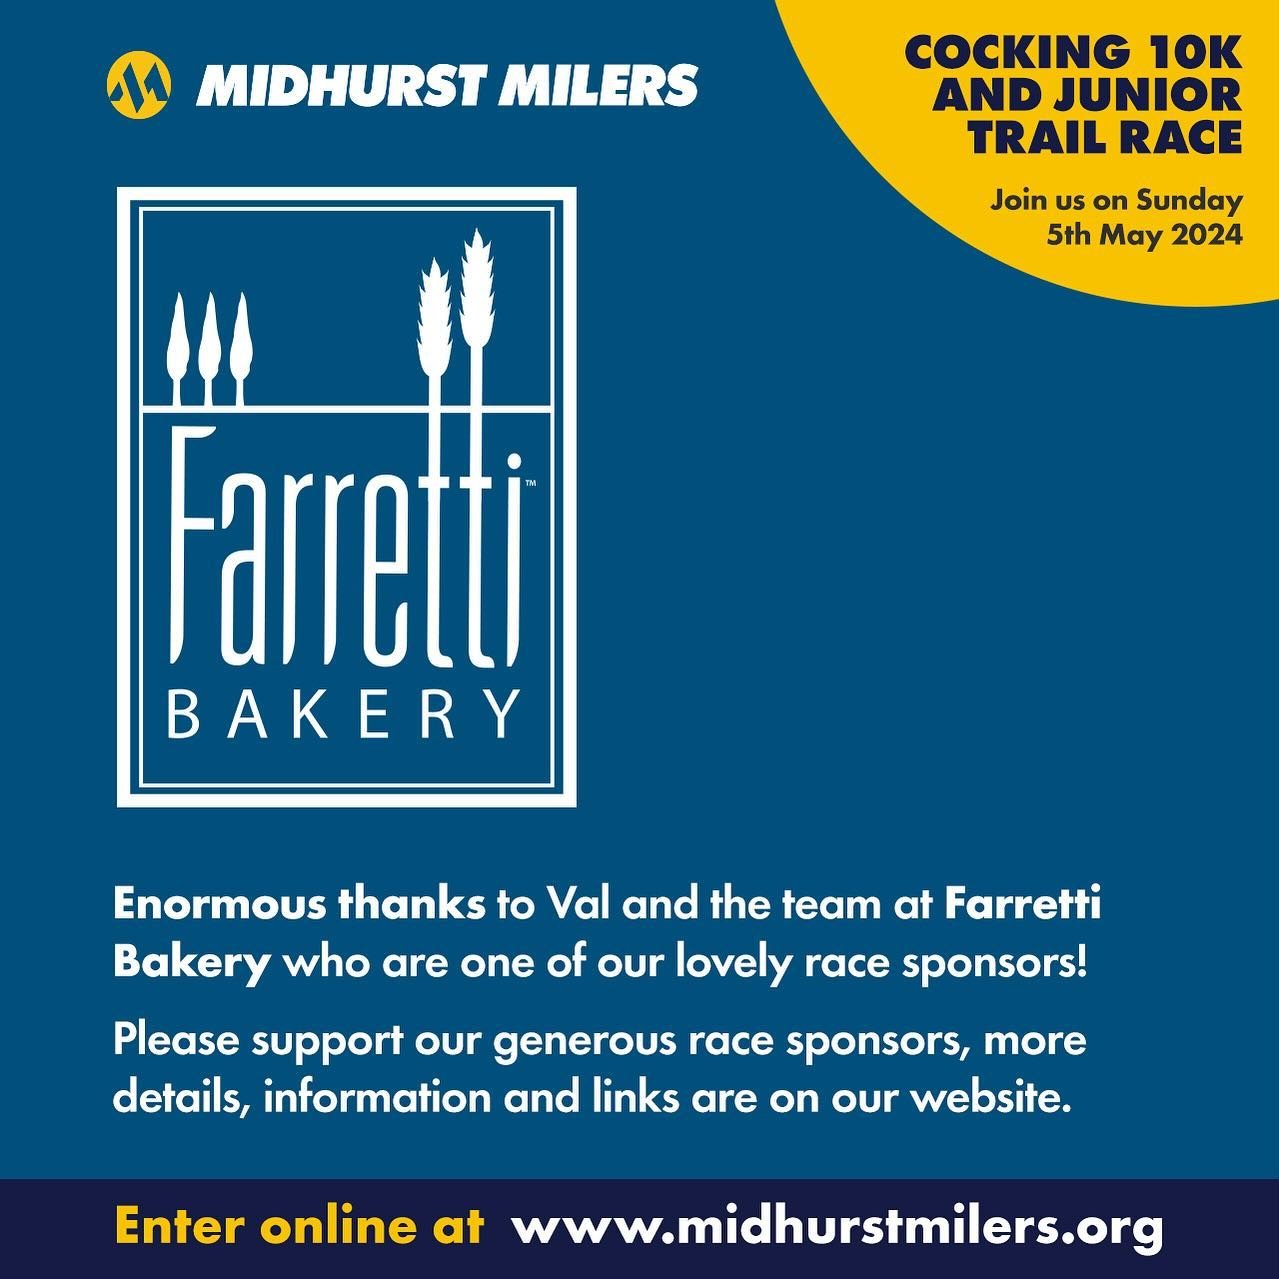 A big thank you to Val and the team at Farretti for sponsoring the Cocking Trail Races. Farretti prepare authentic Italian dishes that you can cook at home. Based at Langham Stables, Farretti is a favourite with the Milers &ndash; wonderful, deliciou